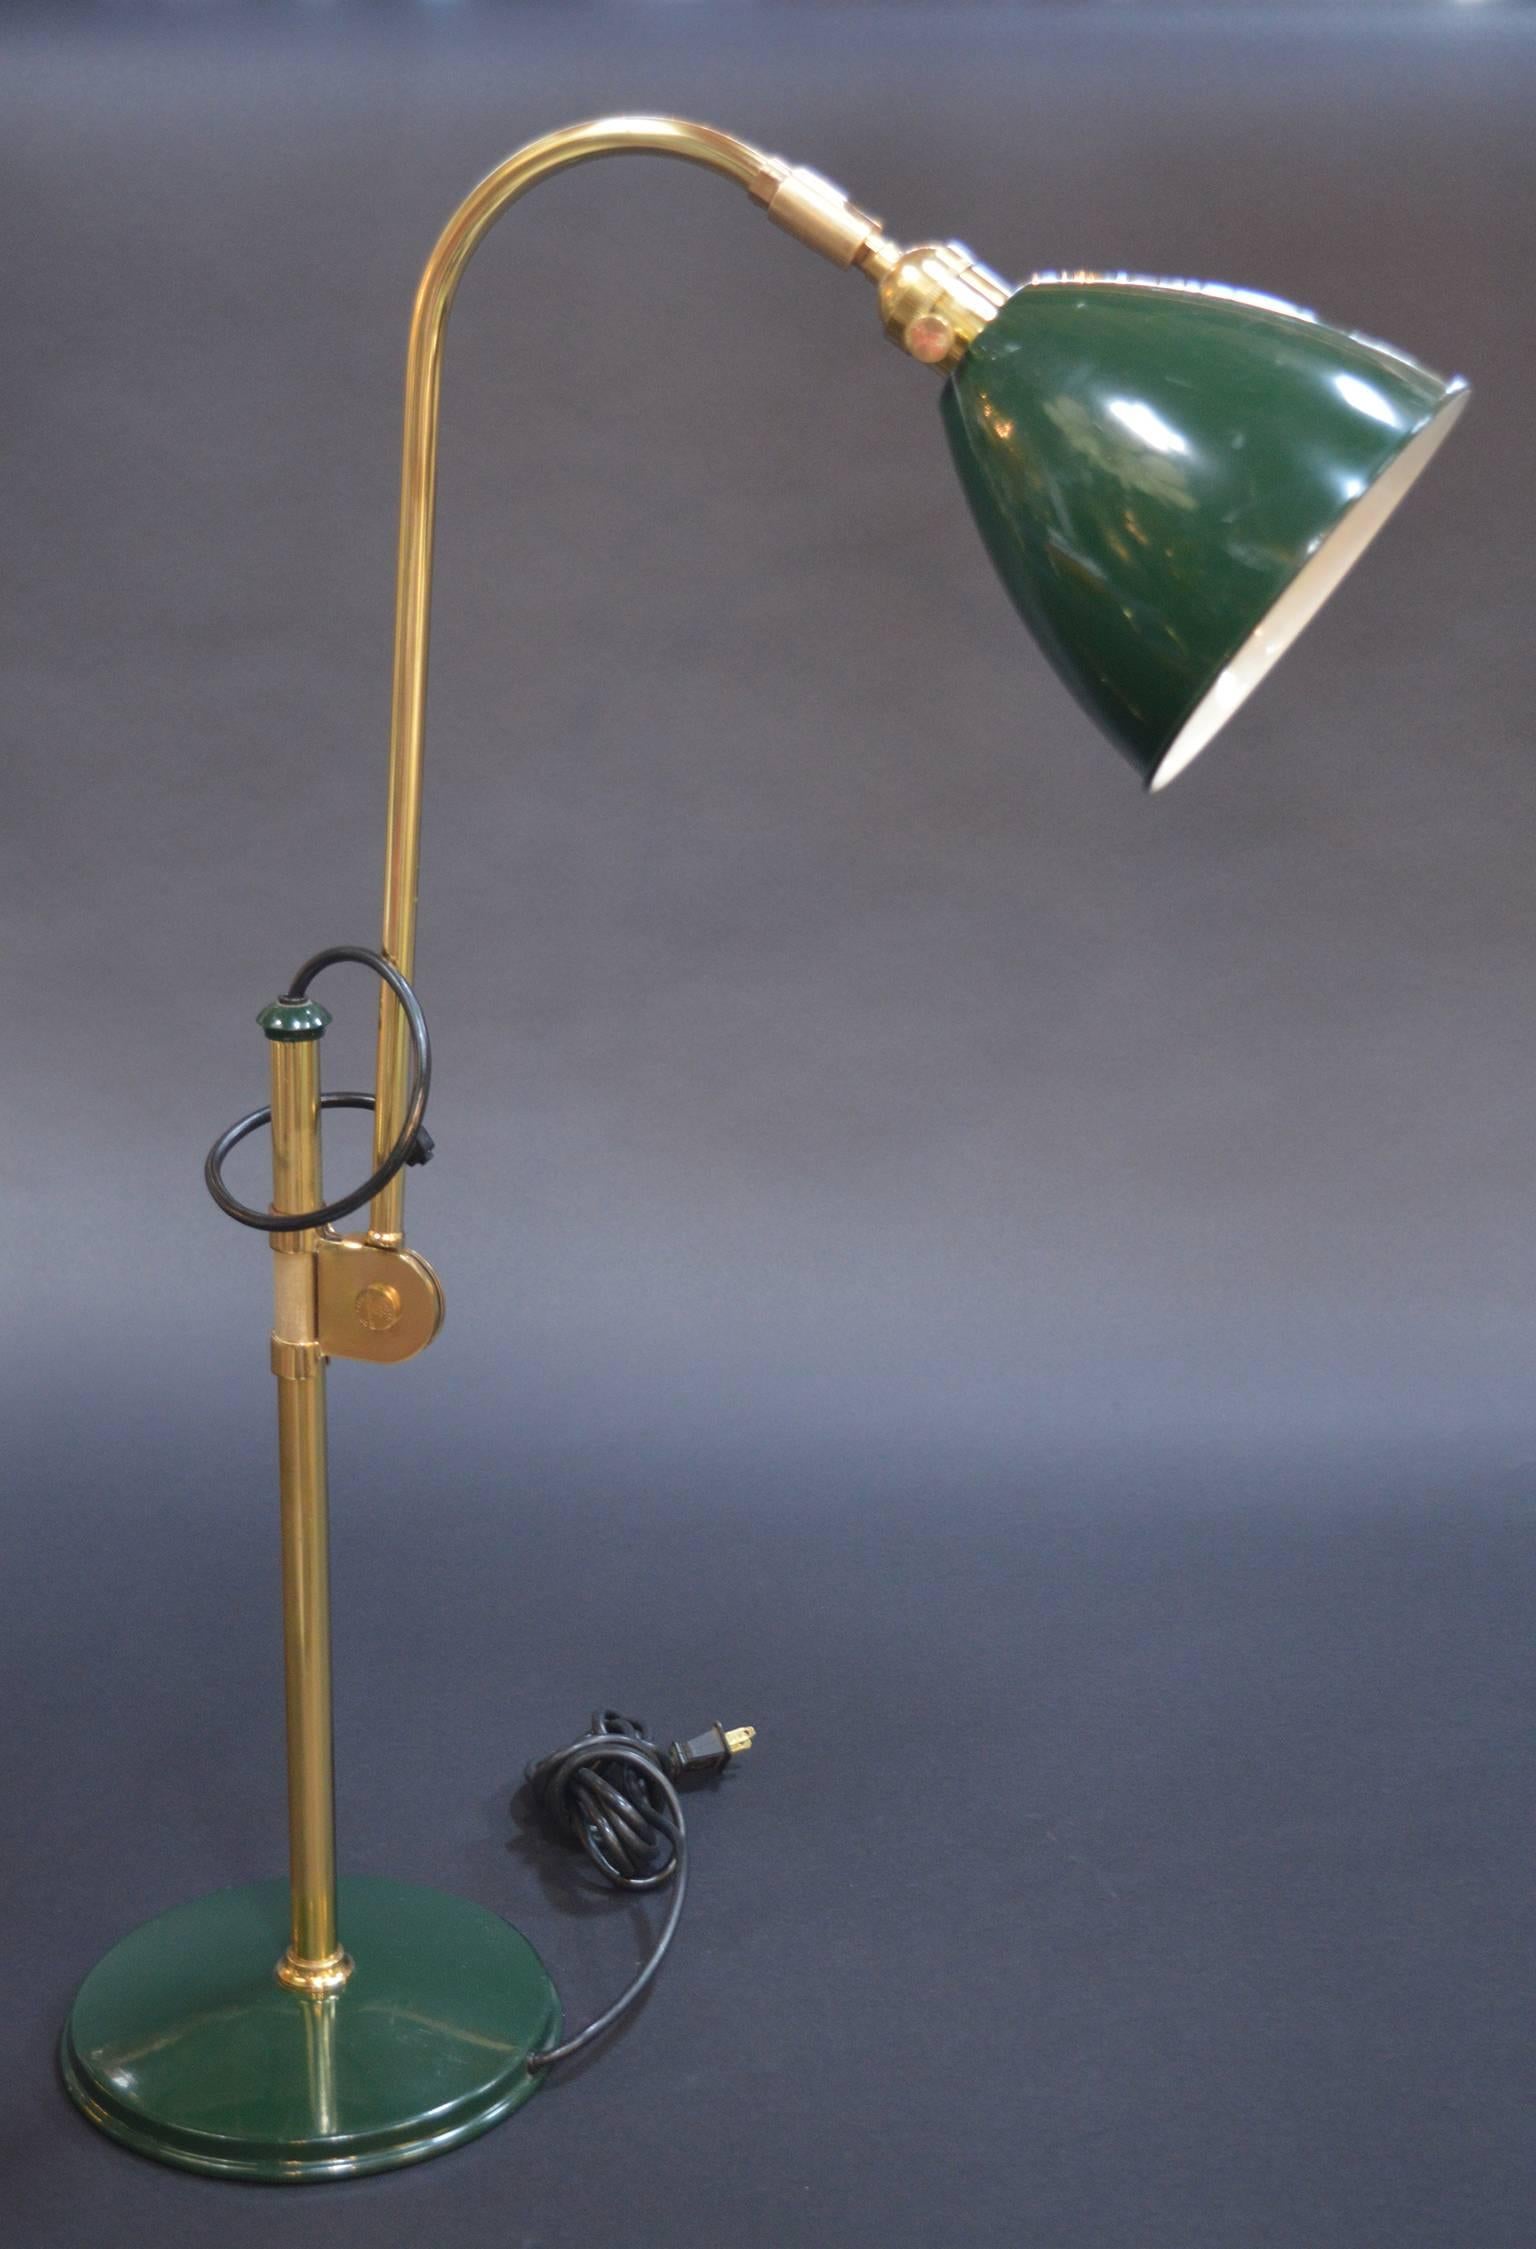 Drafting lamp by Louis Baldinger of painted sheet steel in green and brass. Fully articulated at lamp hood and center of stem.